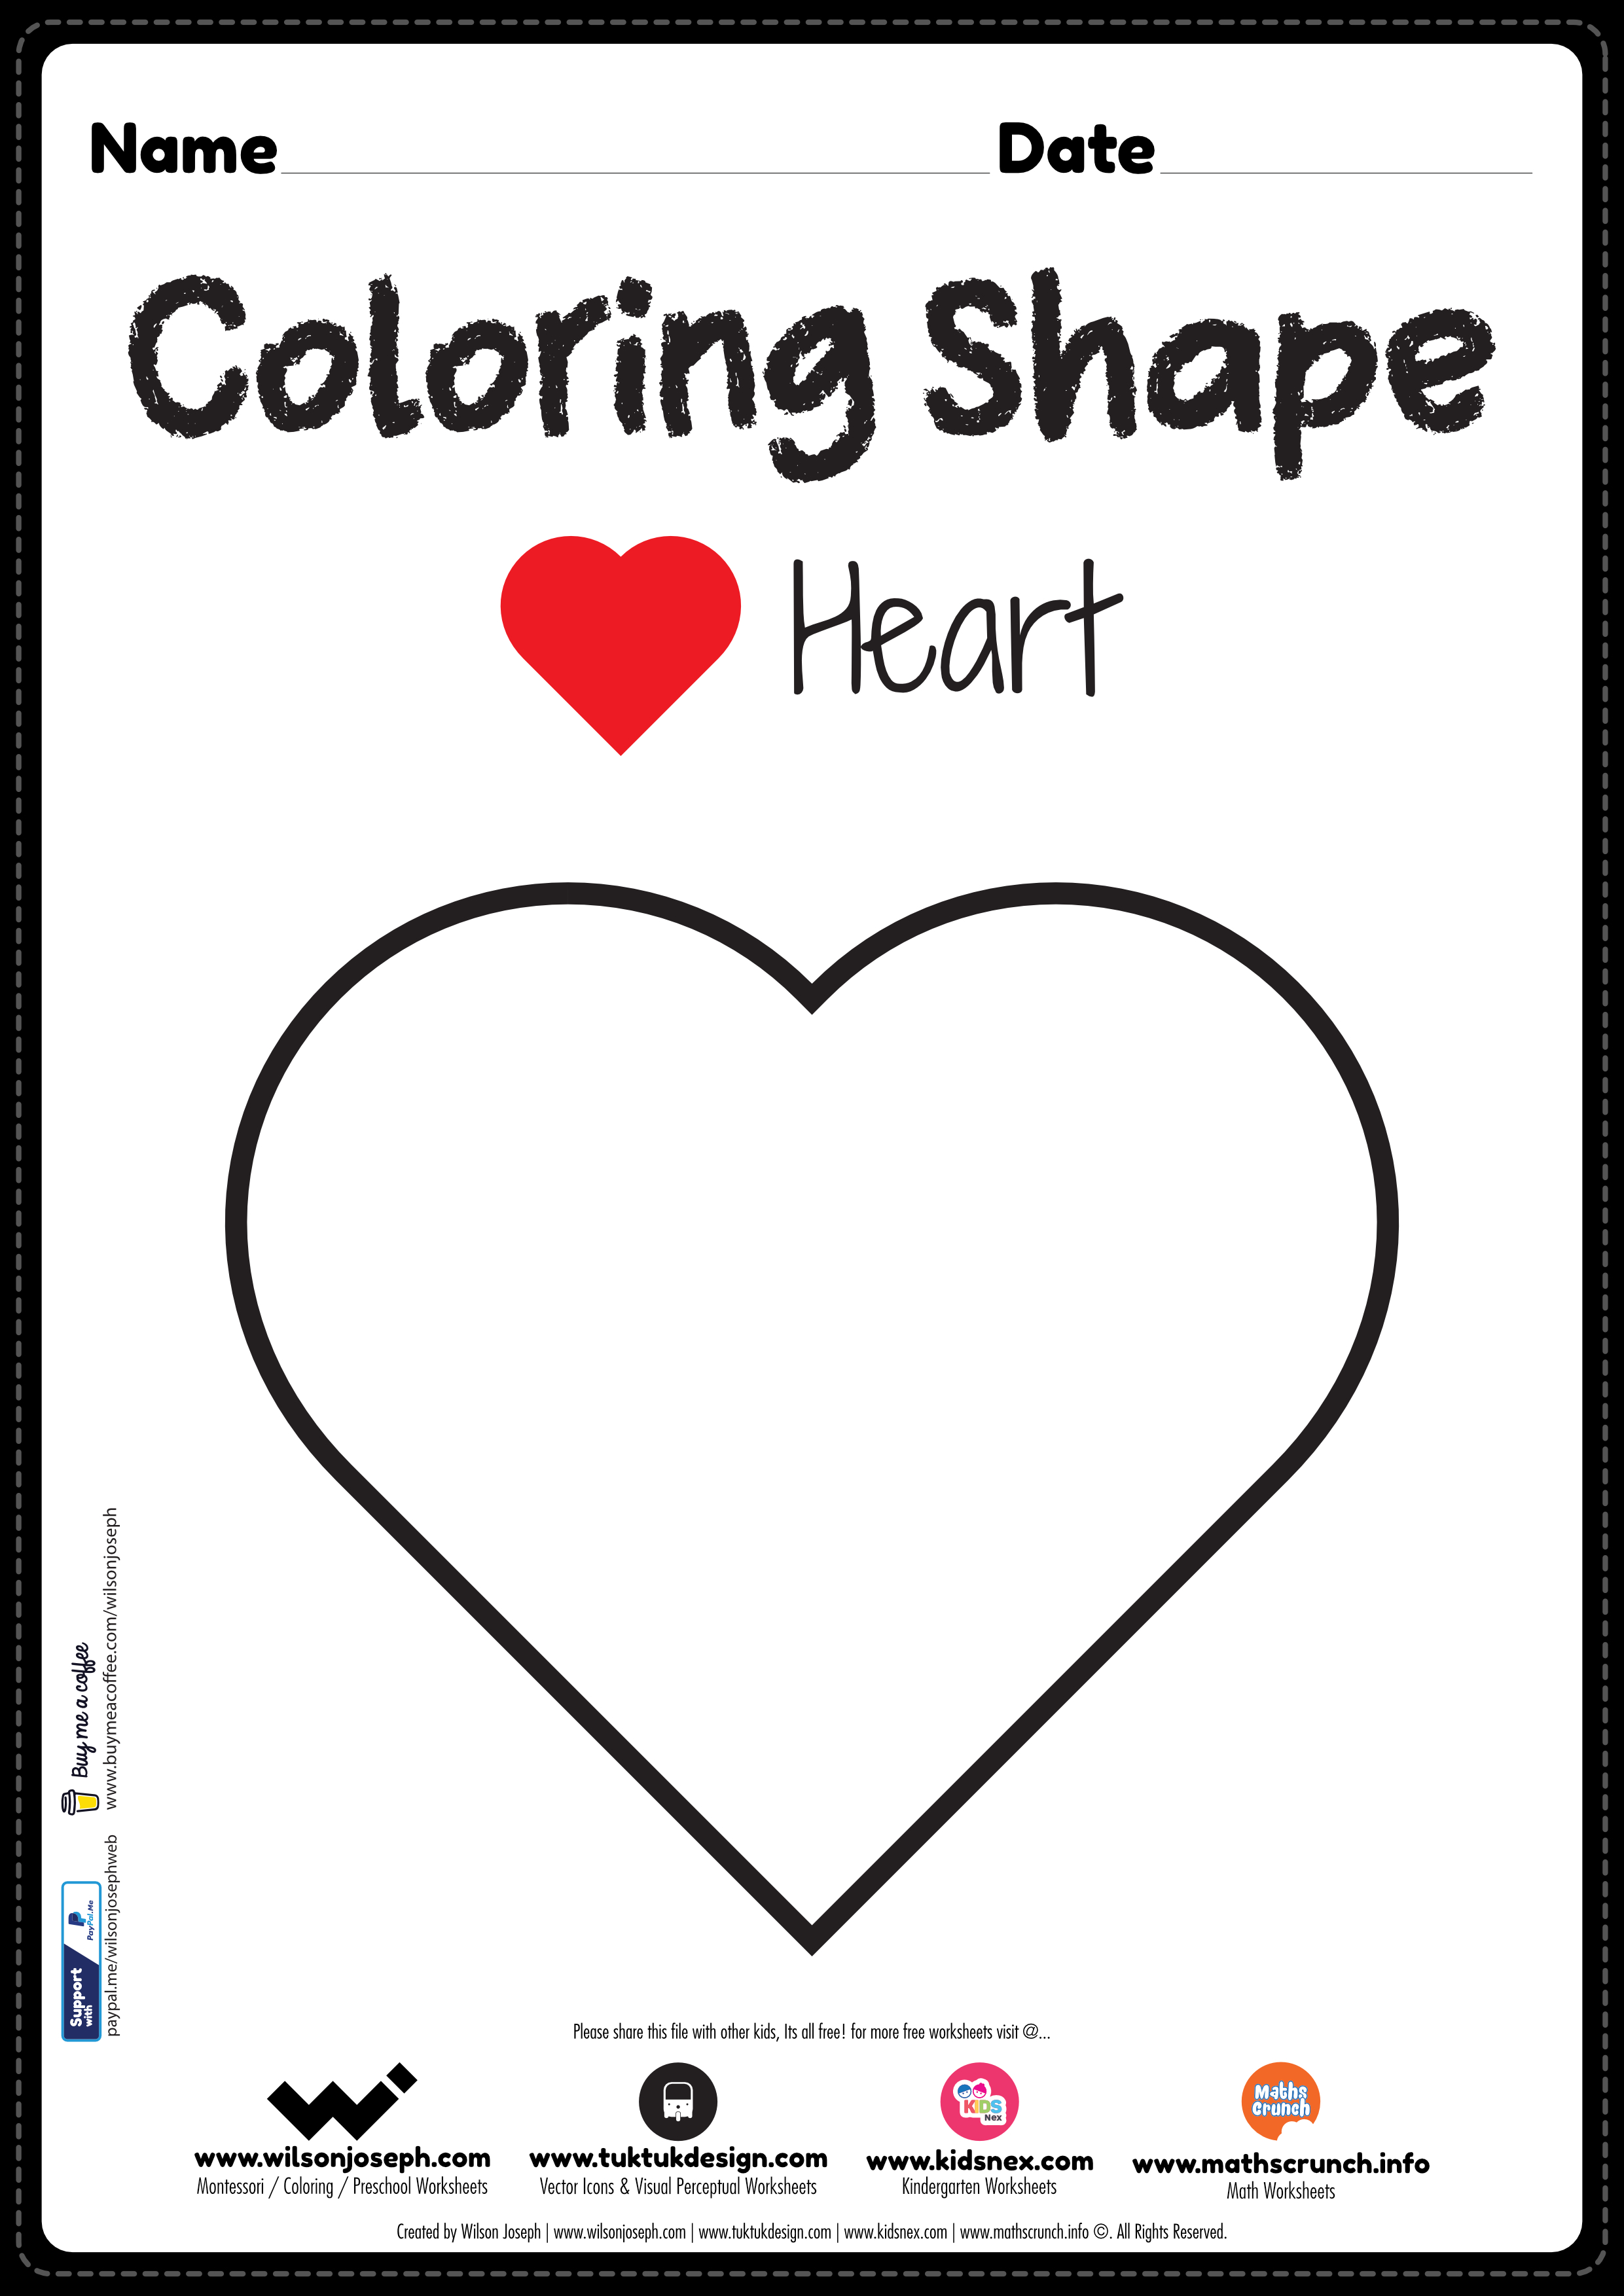 printable heart coloring pages